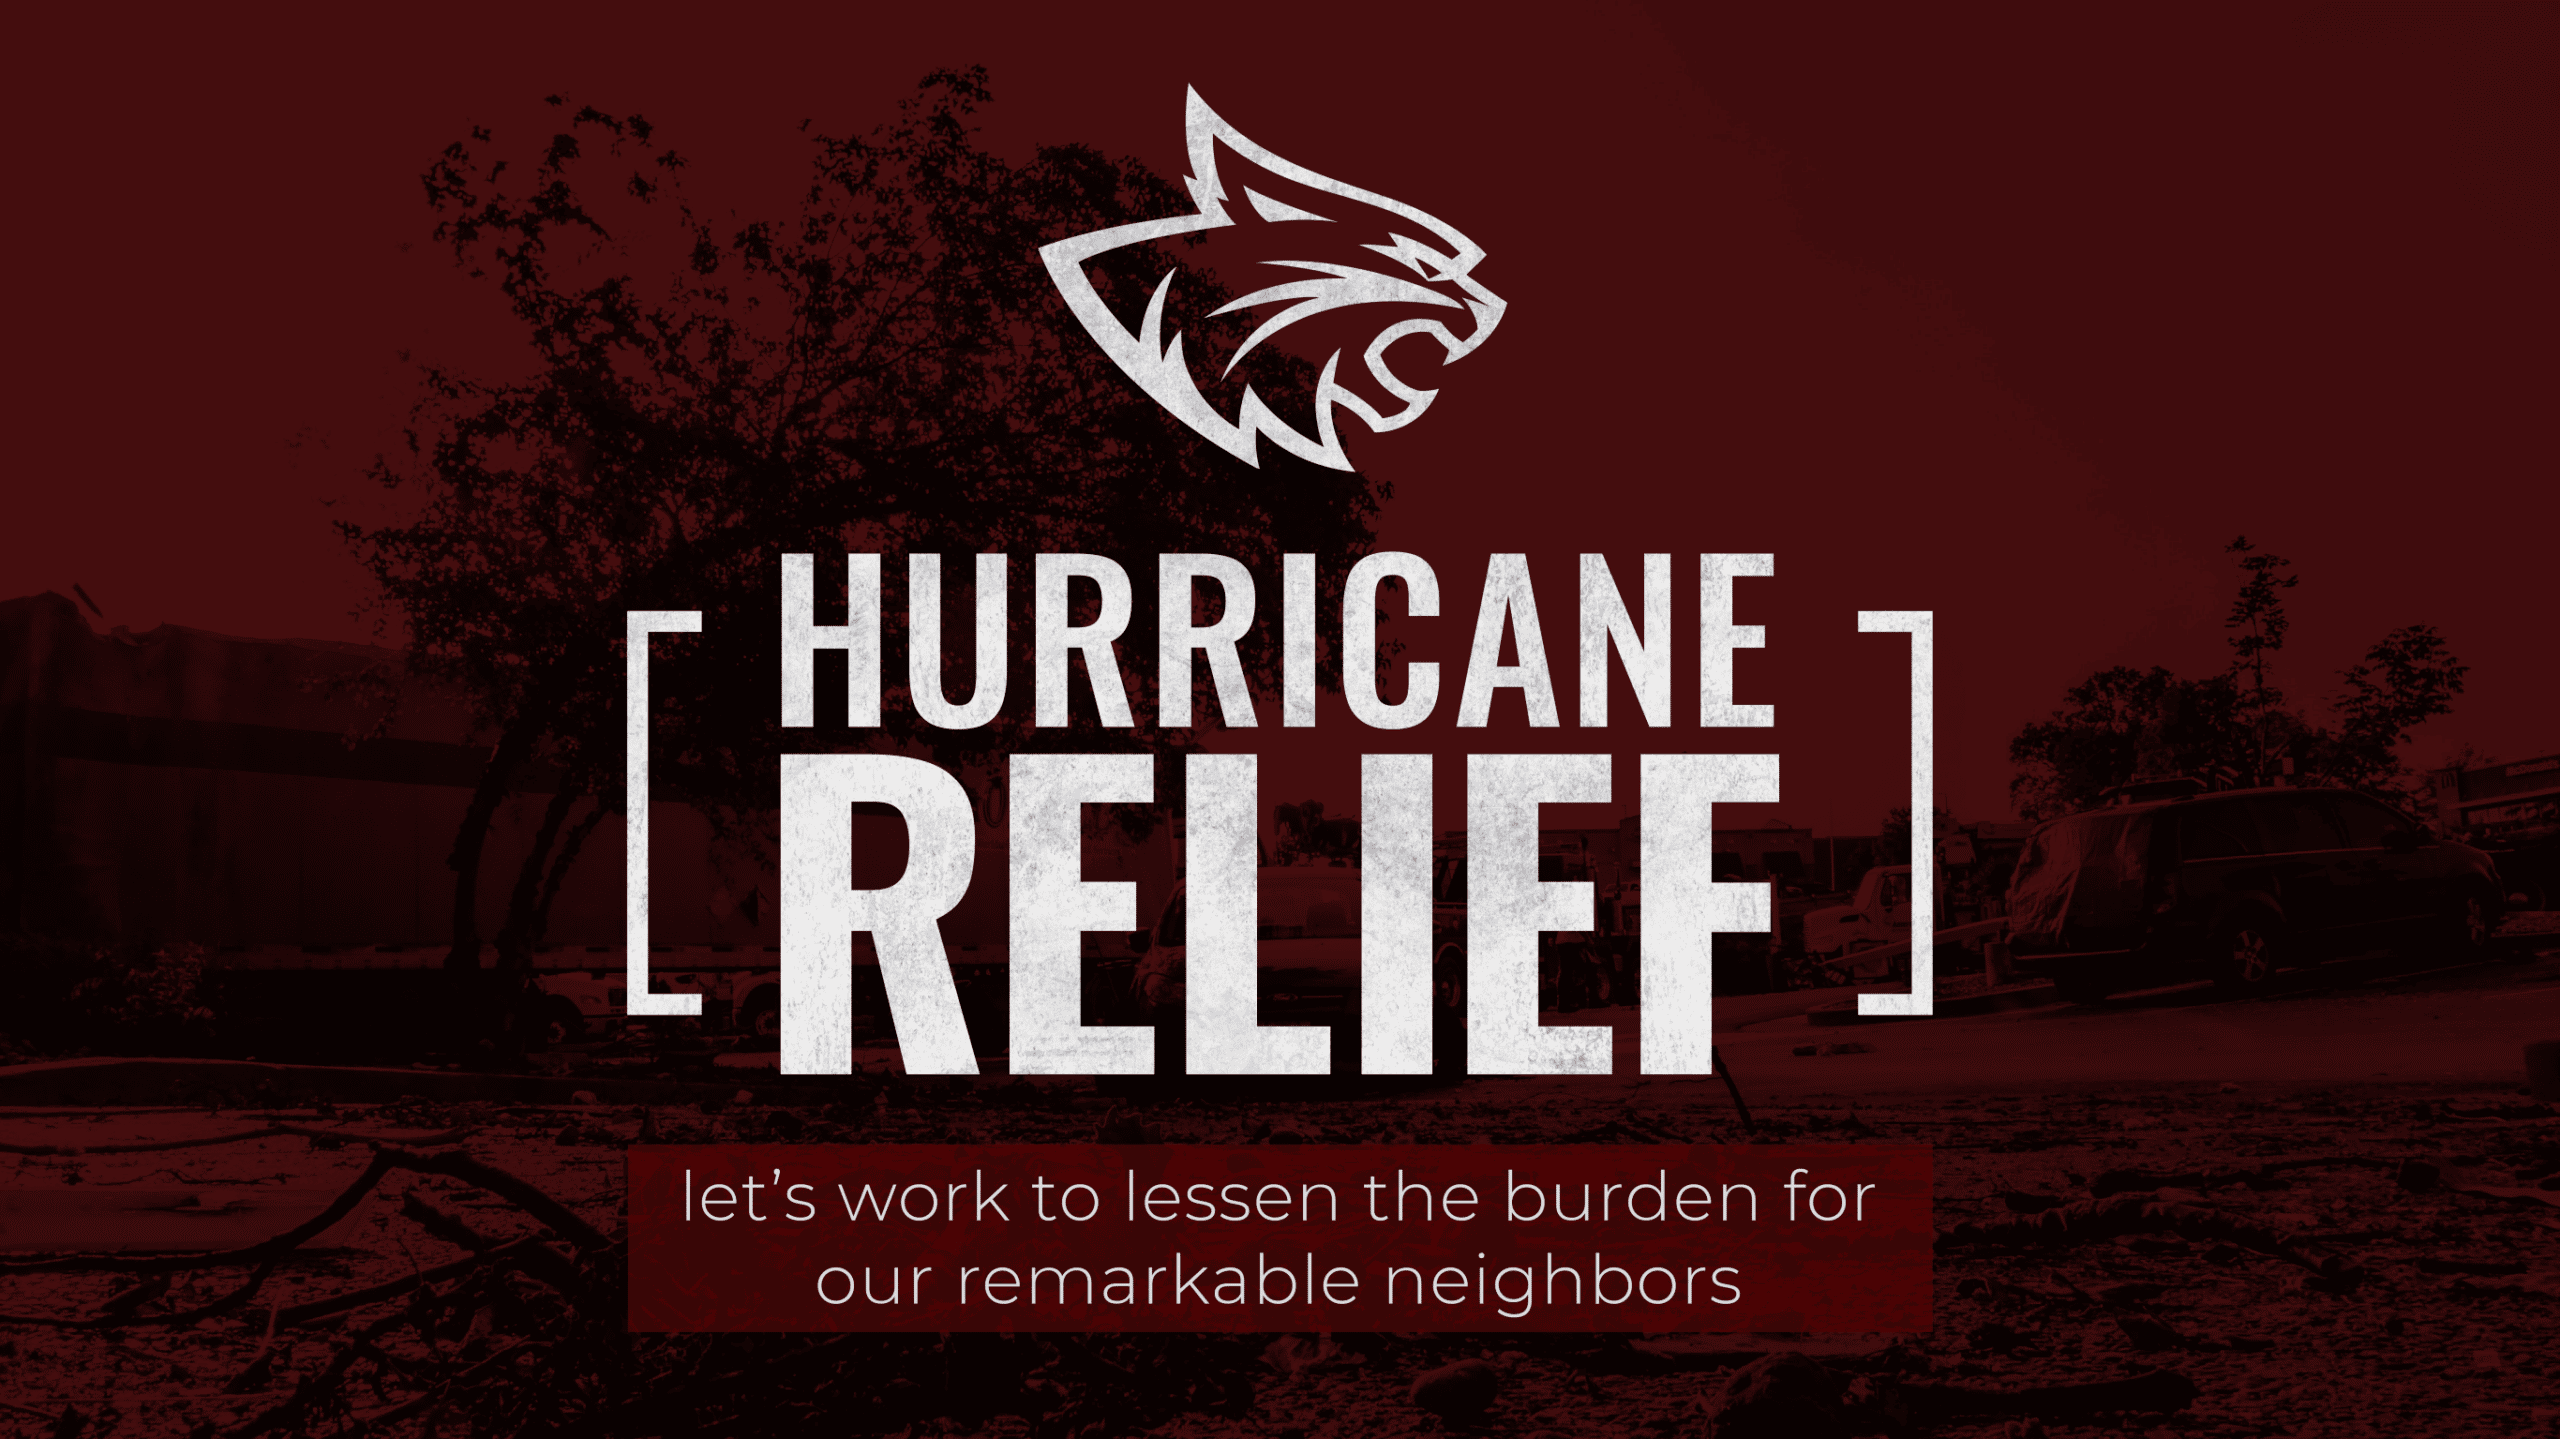 Wildcat head over text of Hurricane Relief let's work to lessen the burden for our remarkable neighbors